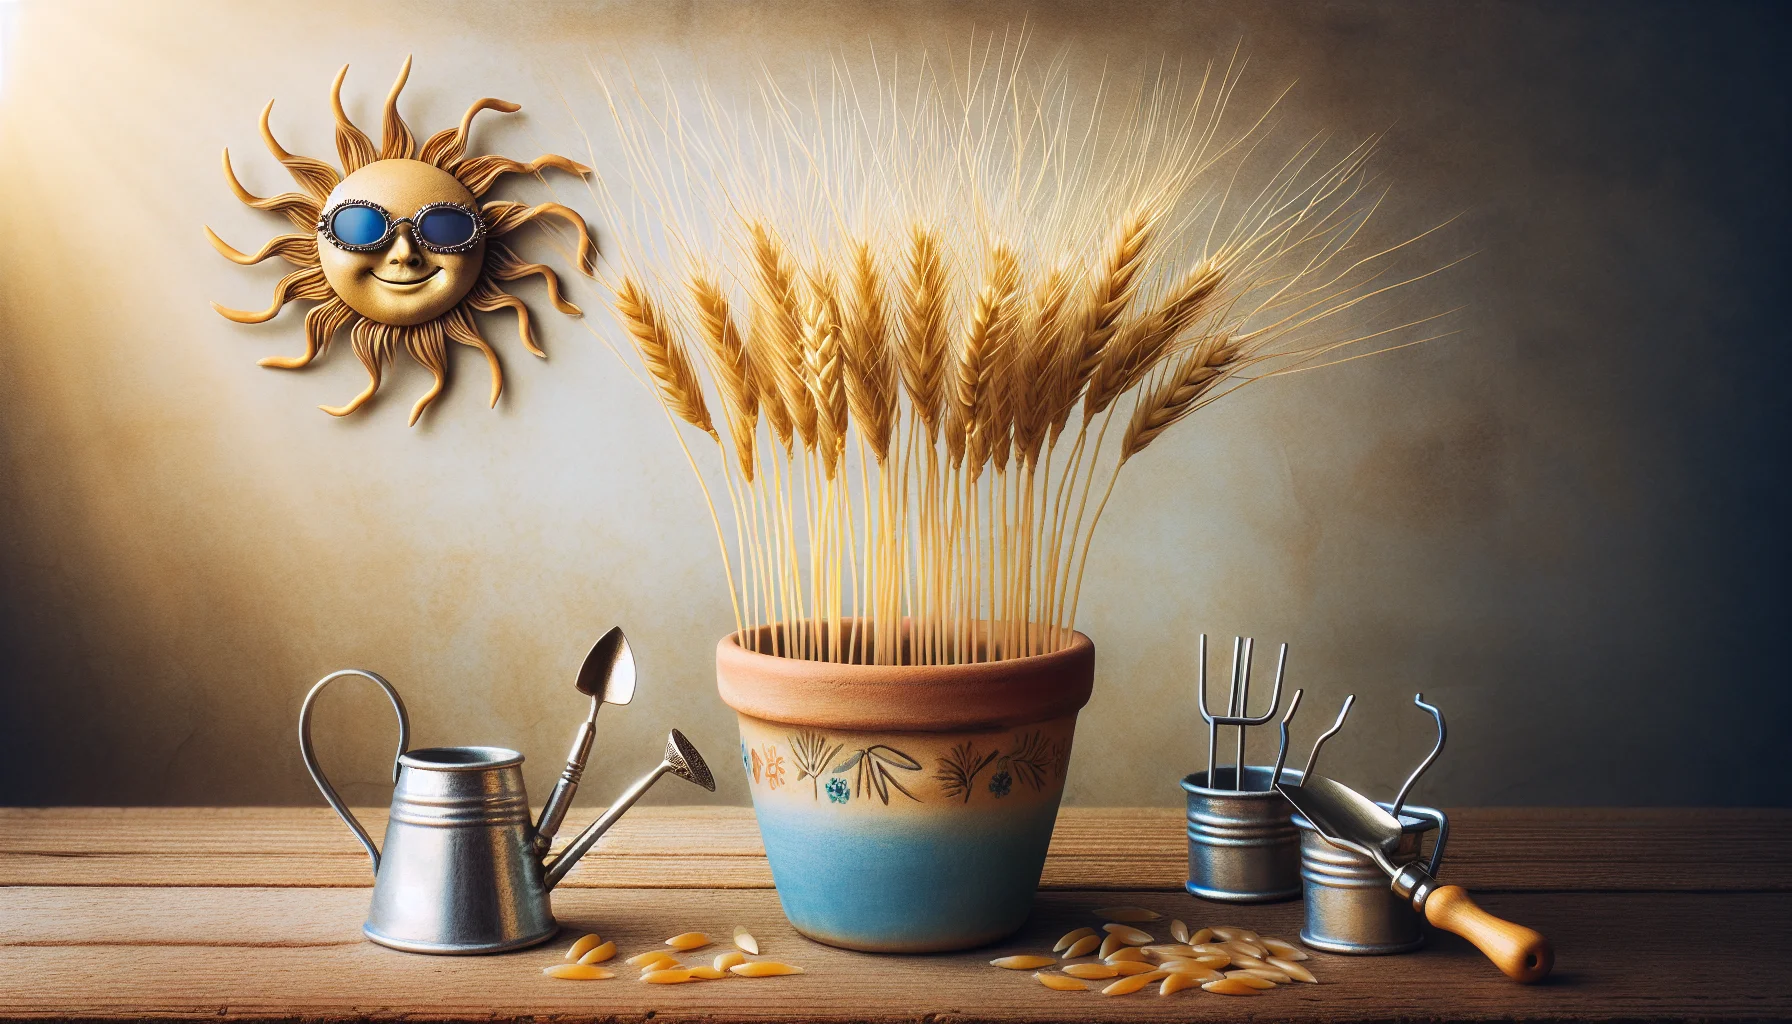 Create a surreal and captivating image that brings humor into gardening. Picture long, golden strands of wheat growing high and mightily from a small, pastel-blue ceramic pot that sits on a rustic wooden table. A miniature, handcrafted, silver gardening tool set appears propped against the pot, suggesting the straw is being actively gardened. A few straw stalks are tangled, seemingly drawn into a farcical ballet of growth and collaboration, encouraging an amusing anthropomorphic endeavor. A fanciful sun, wearing chic sunglasses and flashing a dazzling, radiant smile, hovers in the background, providing a whimsical touch. Let this image stir laughter, and inspire individuals of all descents and gender to embark upon their gardening pursuits.